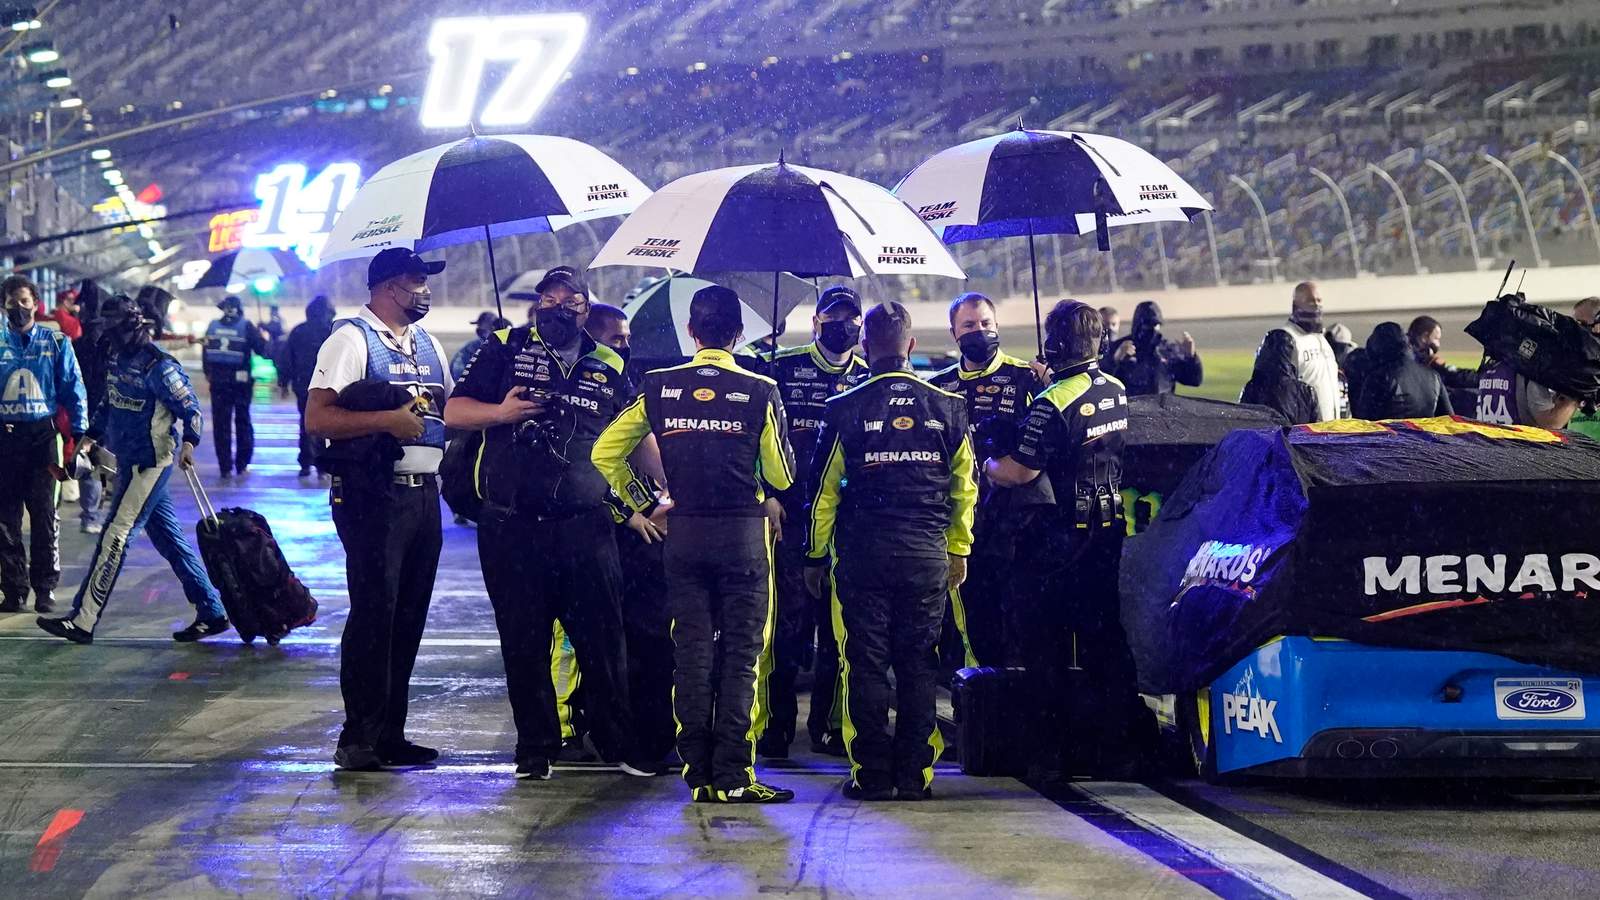 Heading to the race? Here’s when rain could show up at Daytona 500